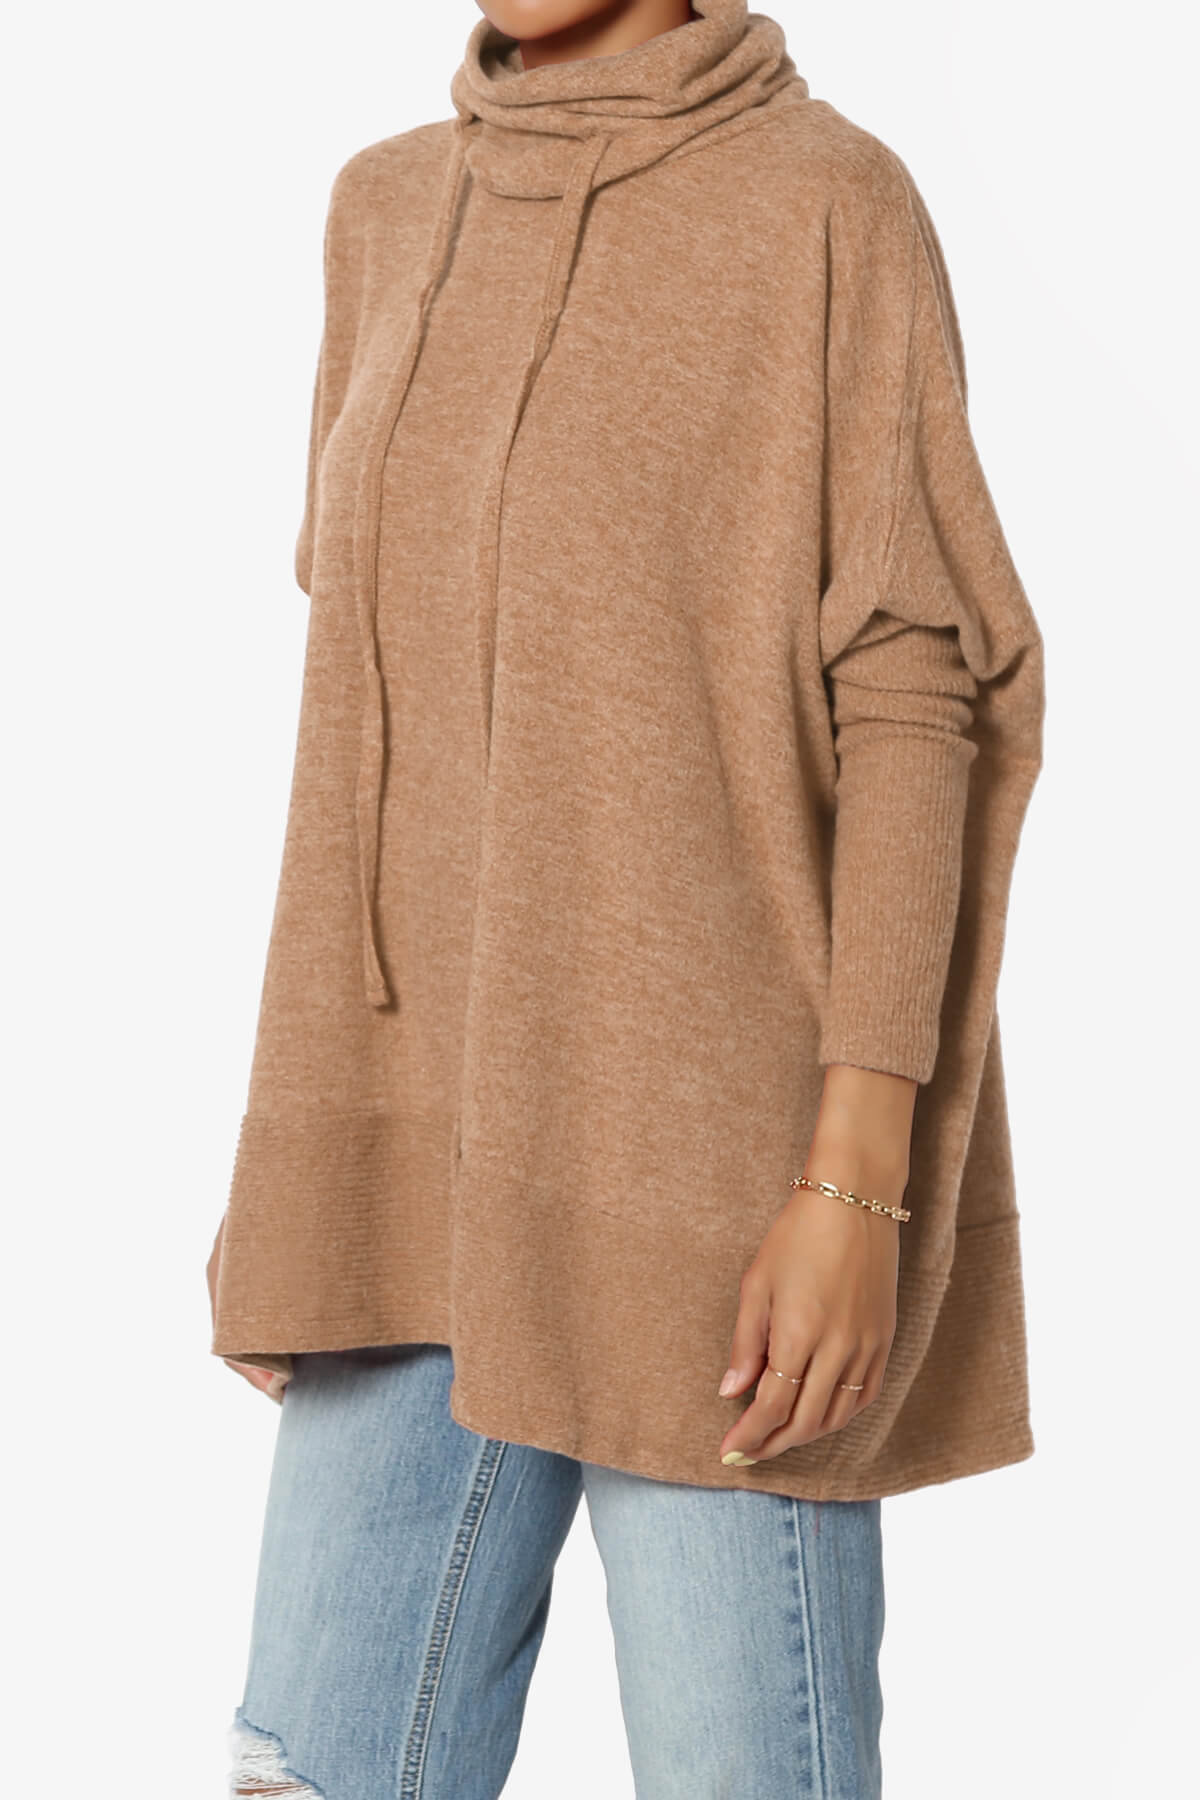 Load image into Gallery viewer, Barclay Cowl Neck Melange Knit Oversized Sweater DEEP CAMEL_3
